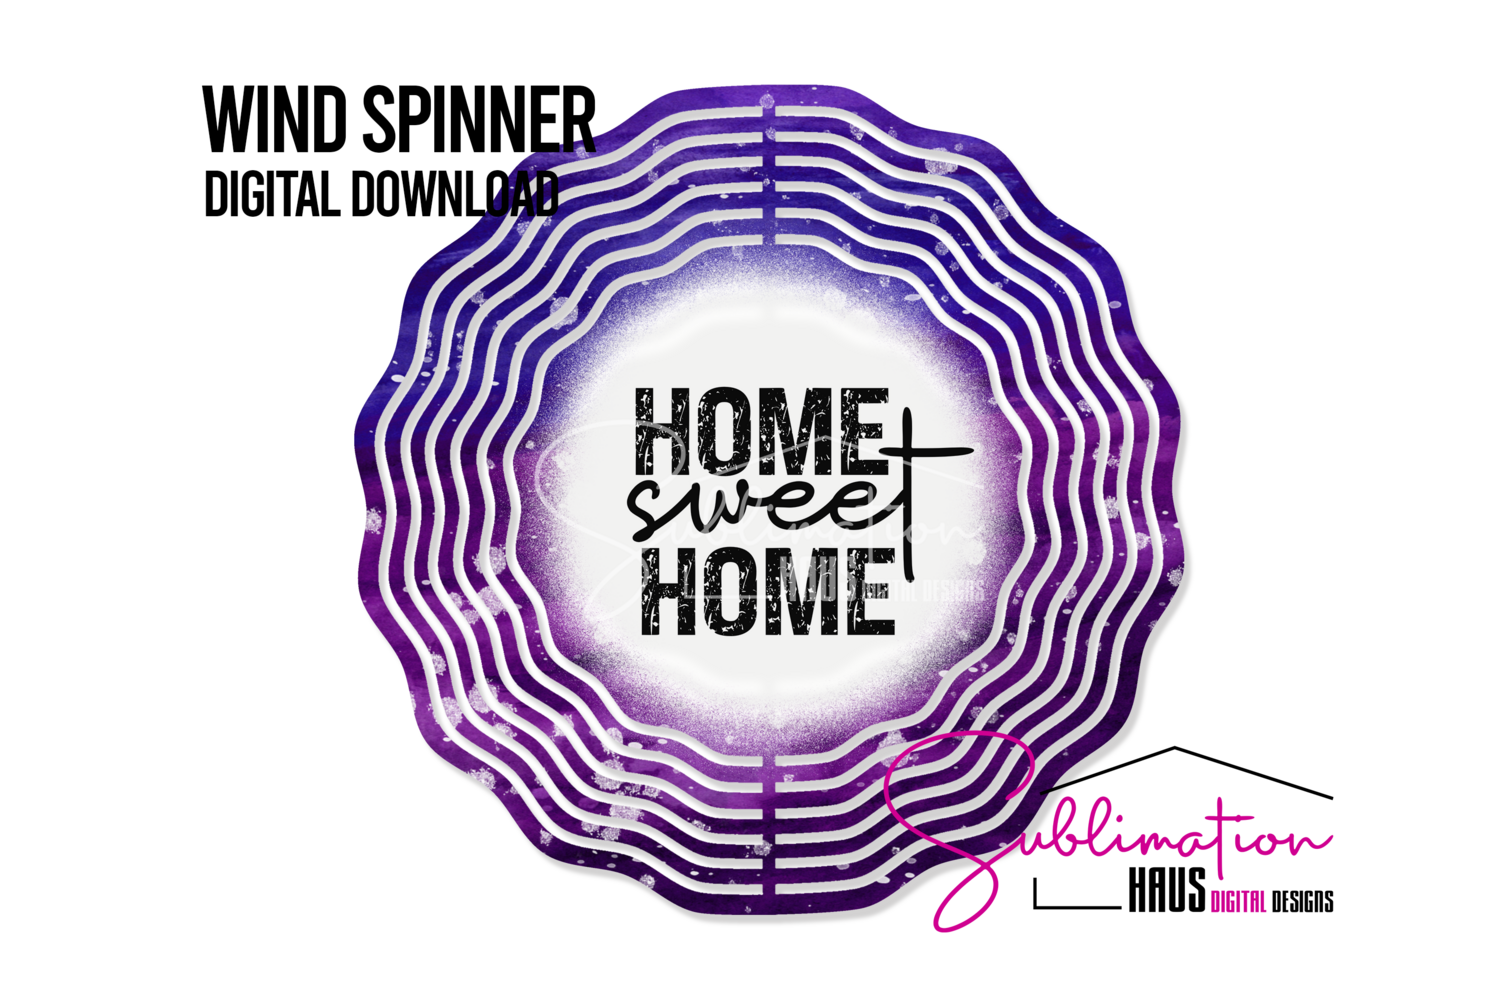 Wind Spinner - Home Sweet Home